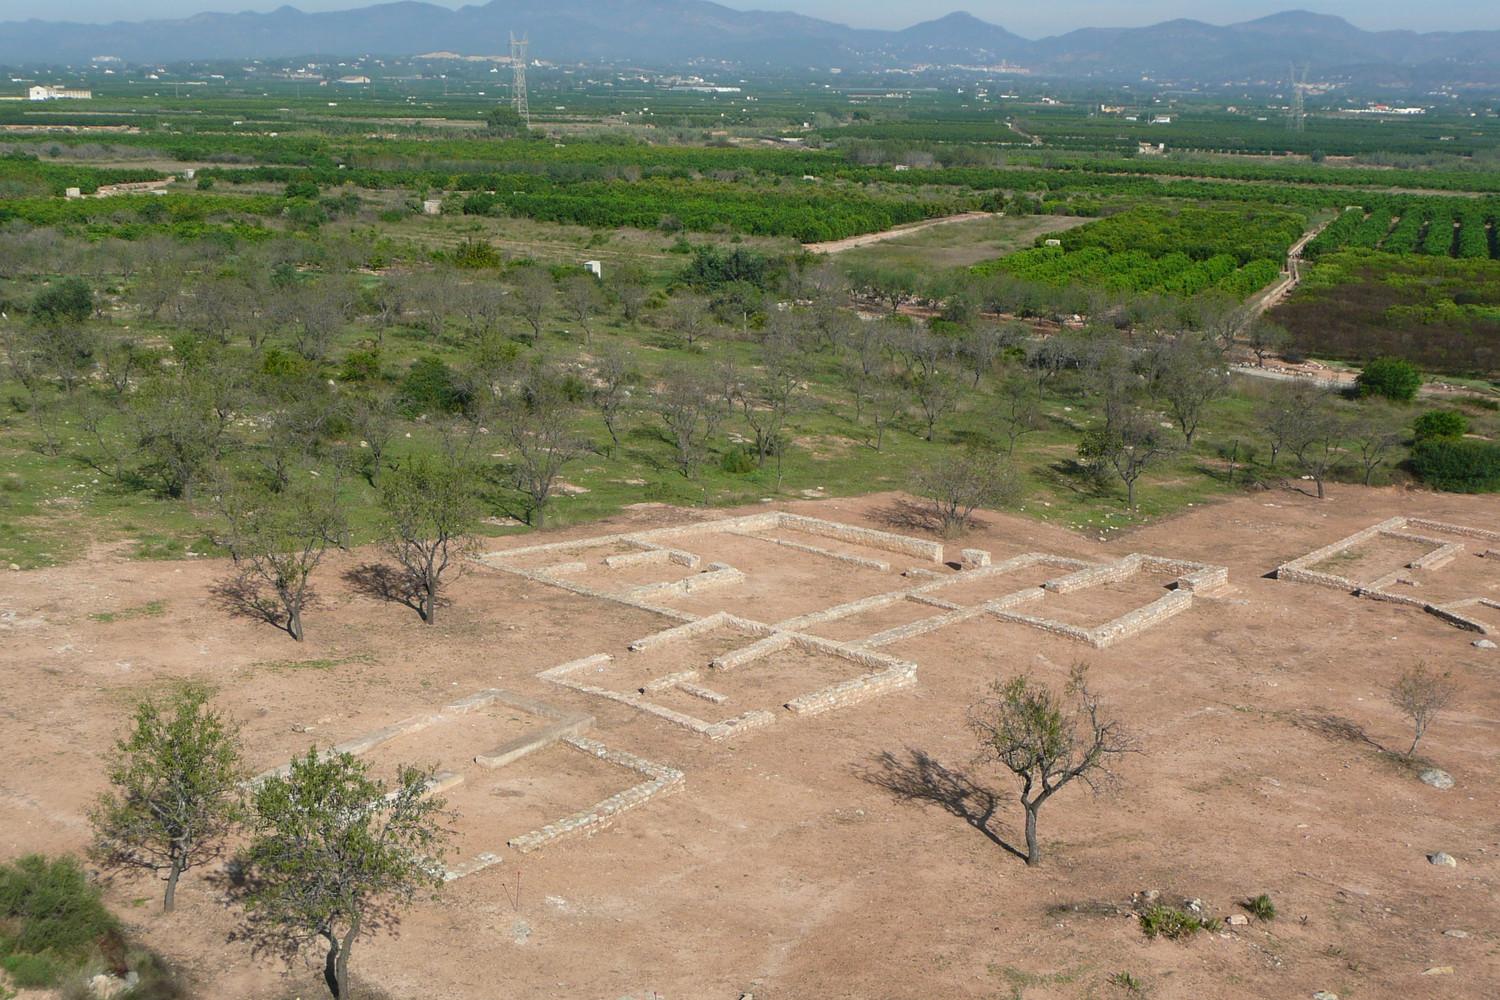 View of the archaeological site near the tower before the work